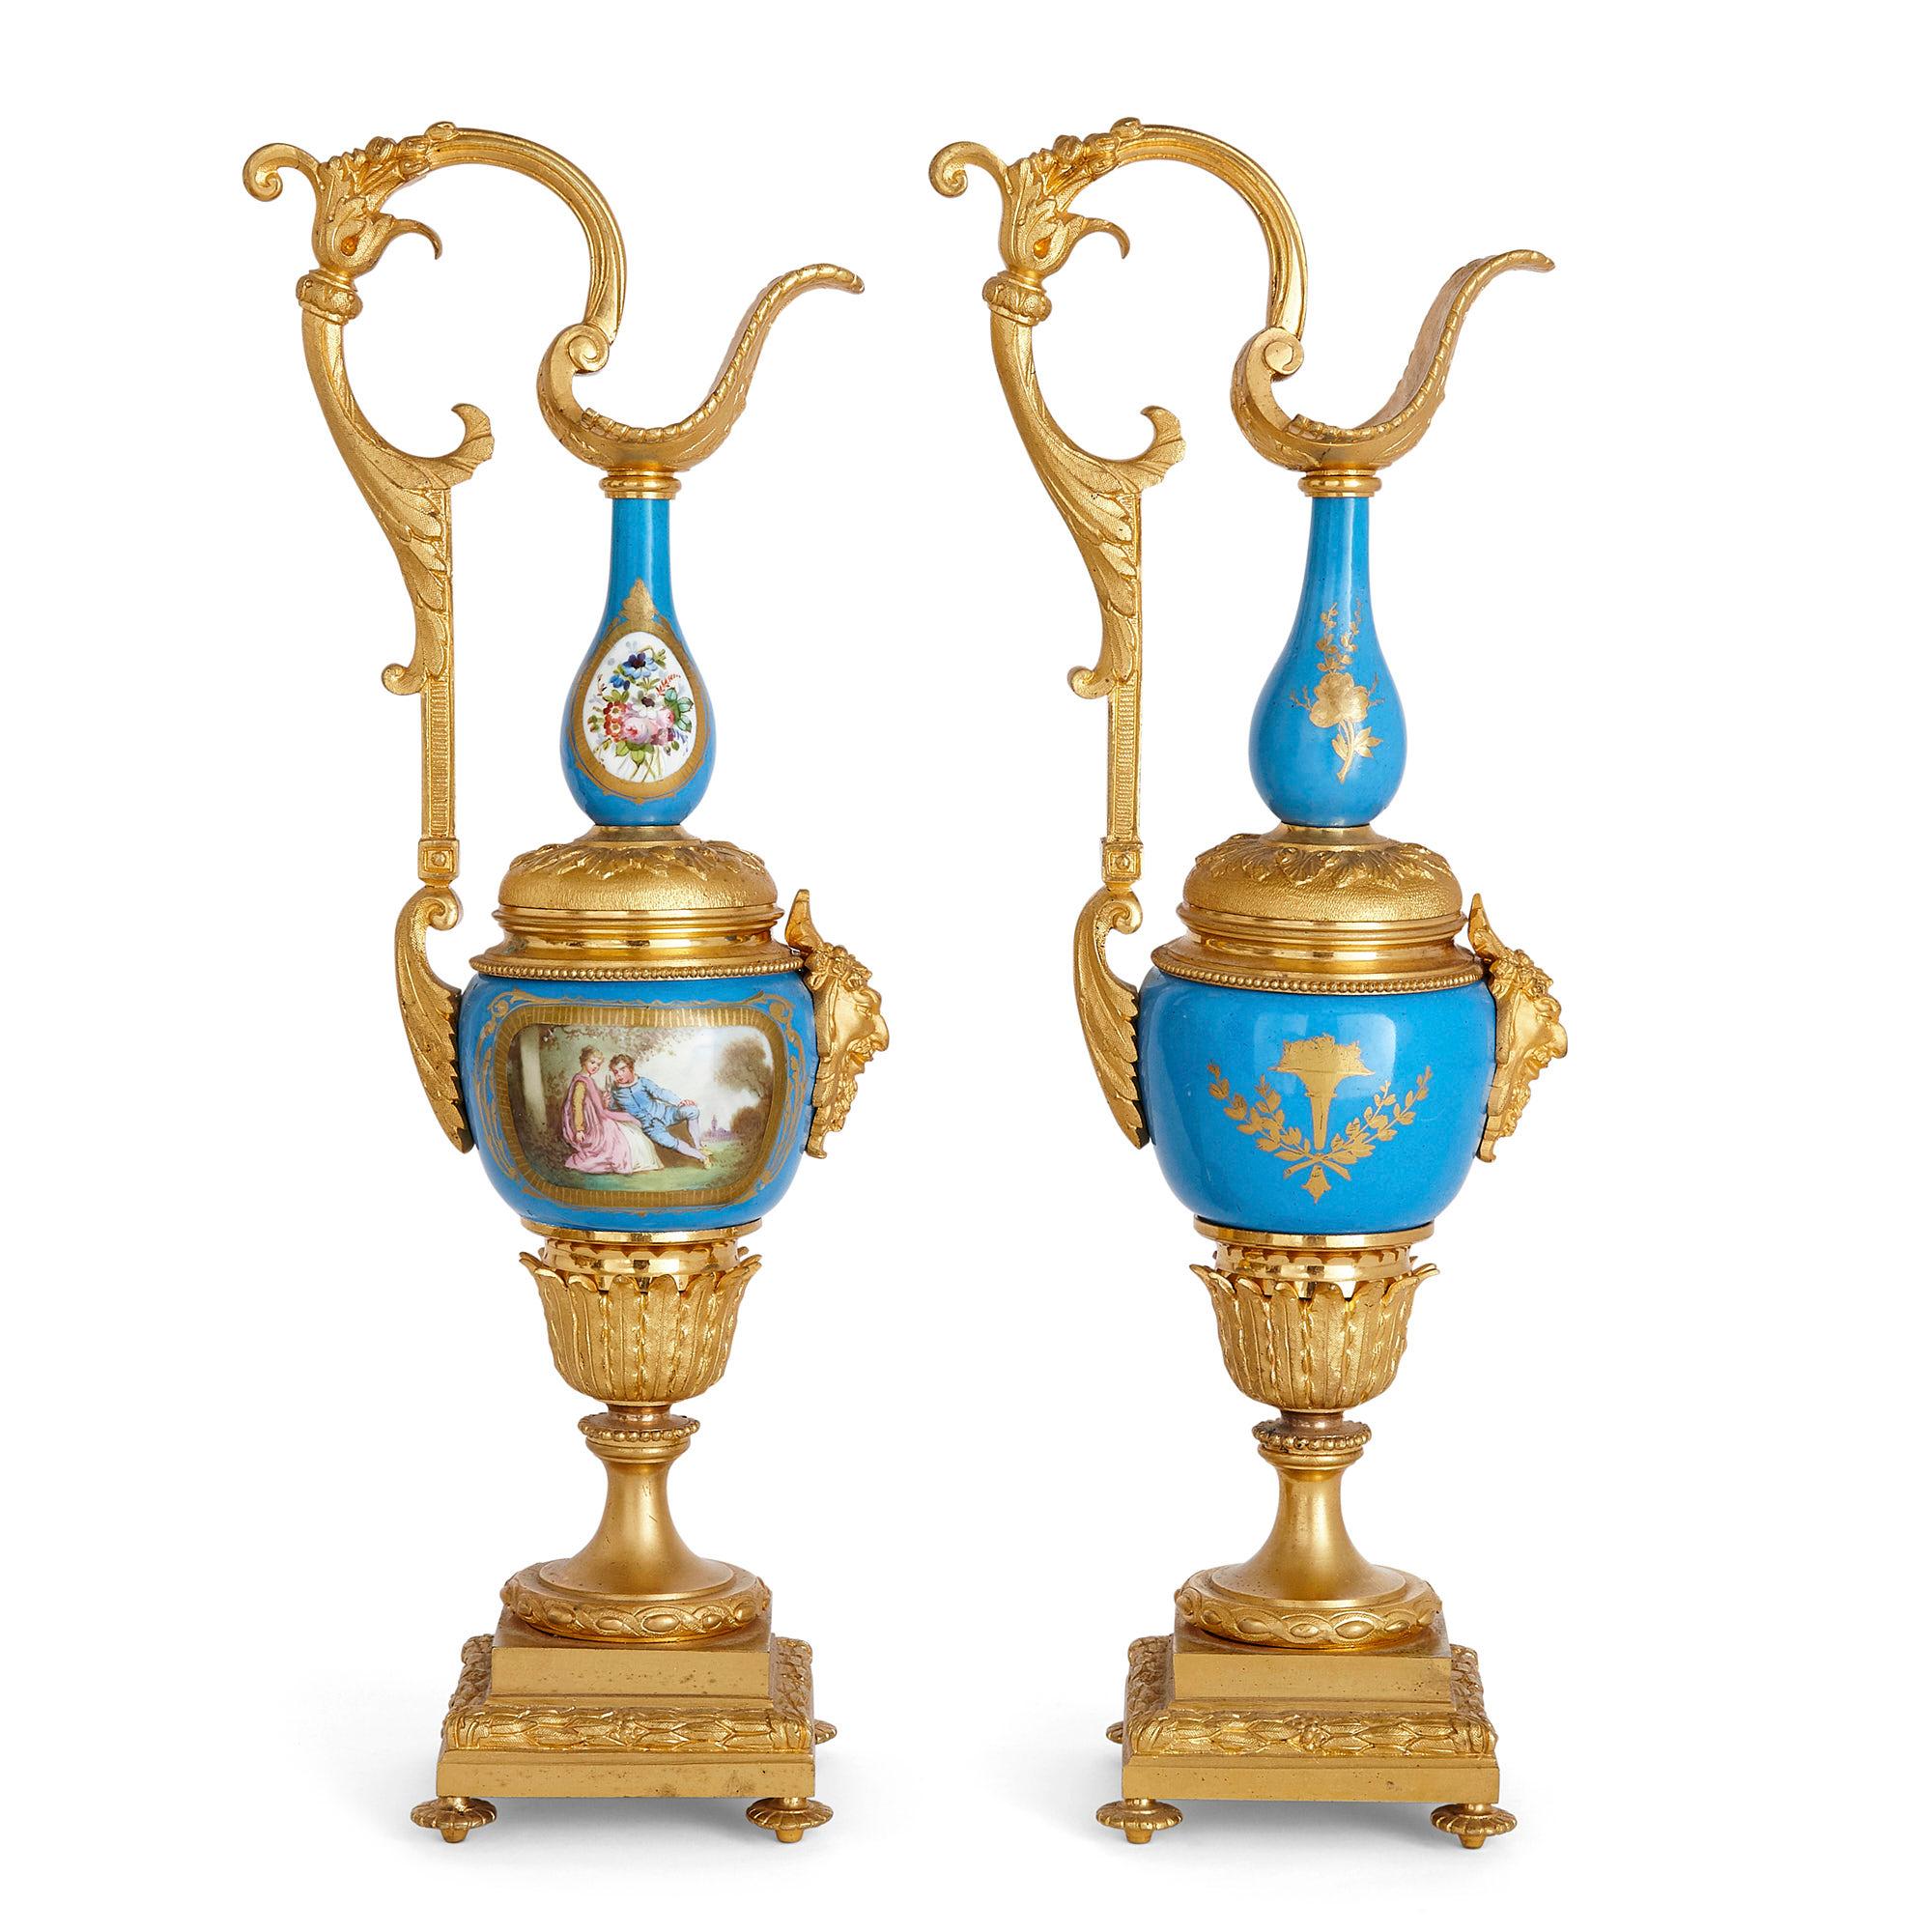 Antique Three-Piece Louis XV and Sèvres Style Clock and Ewer Set In Good Condition For Sale In London, GB